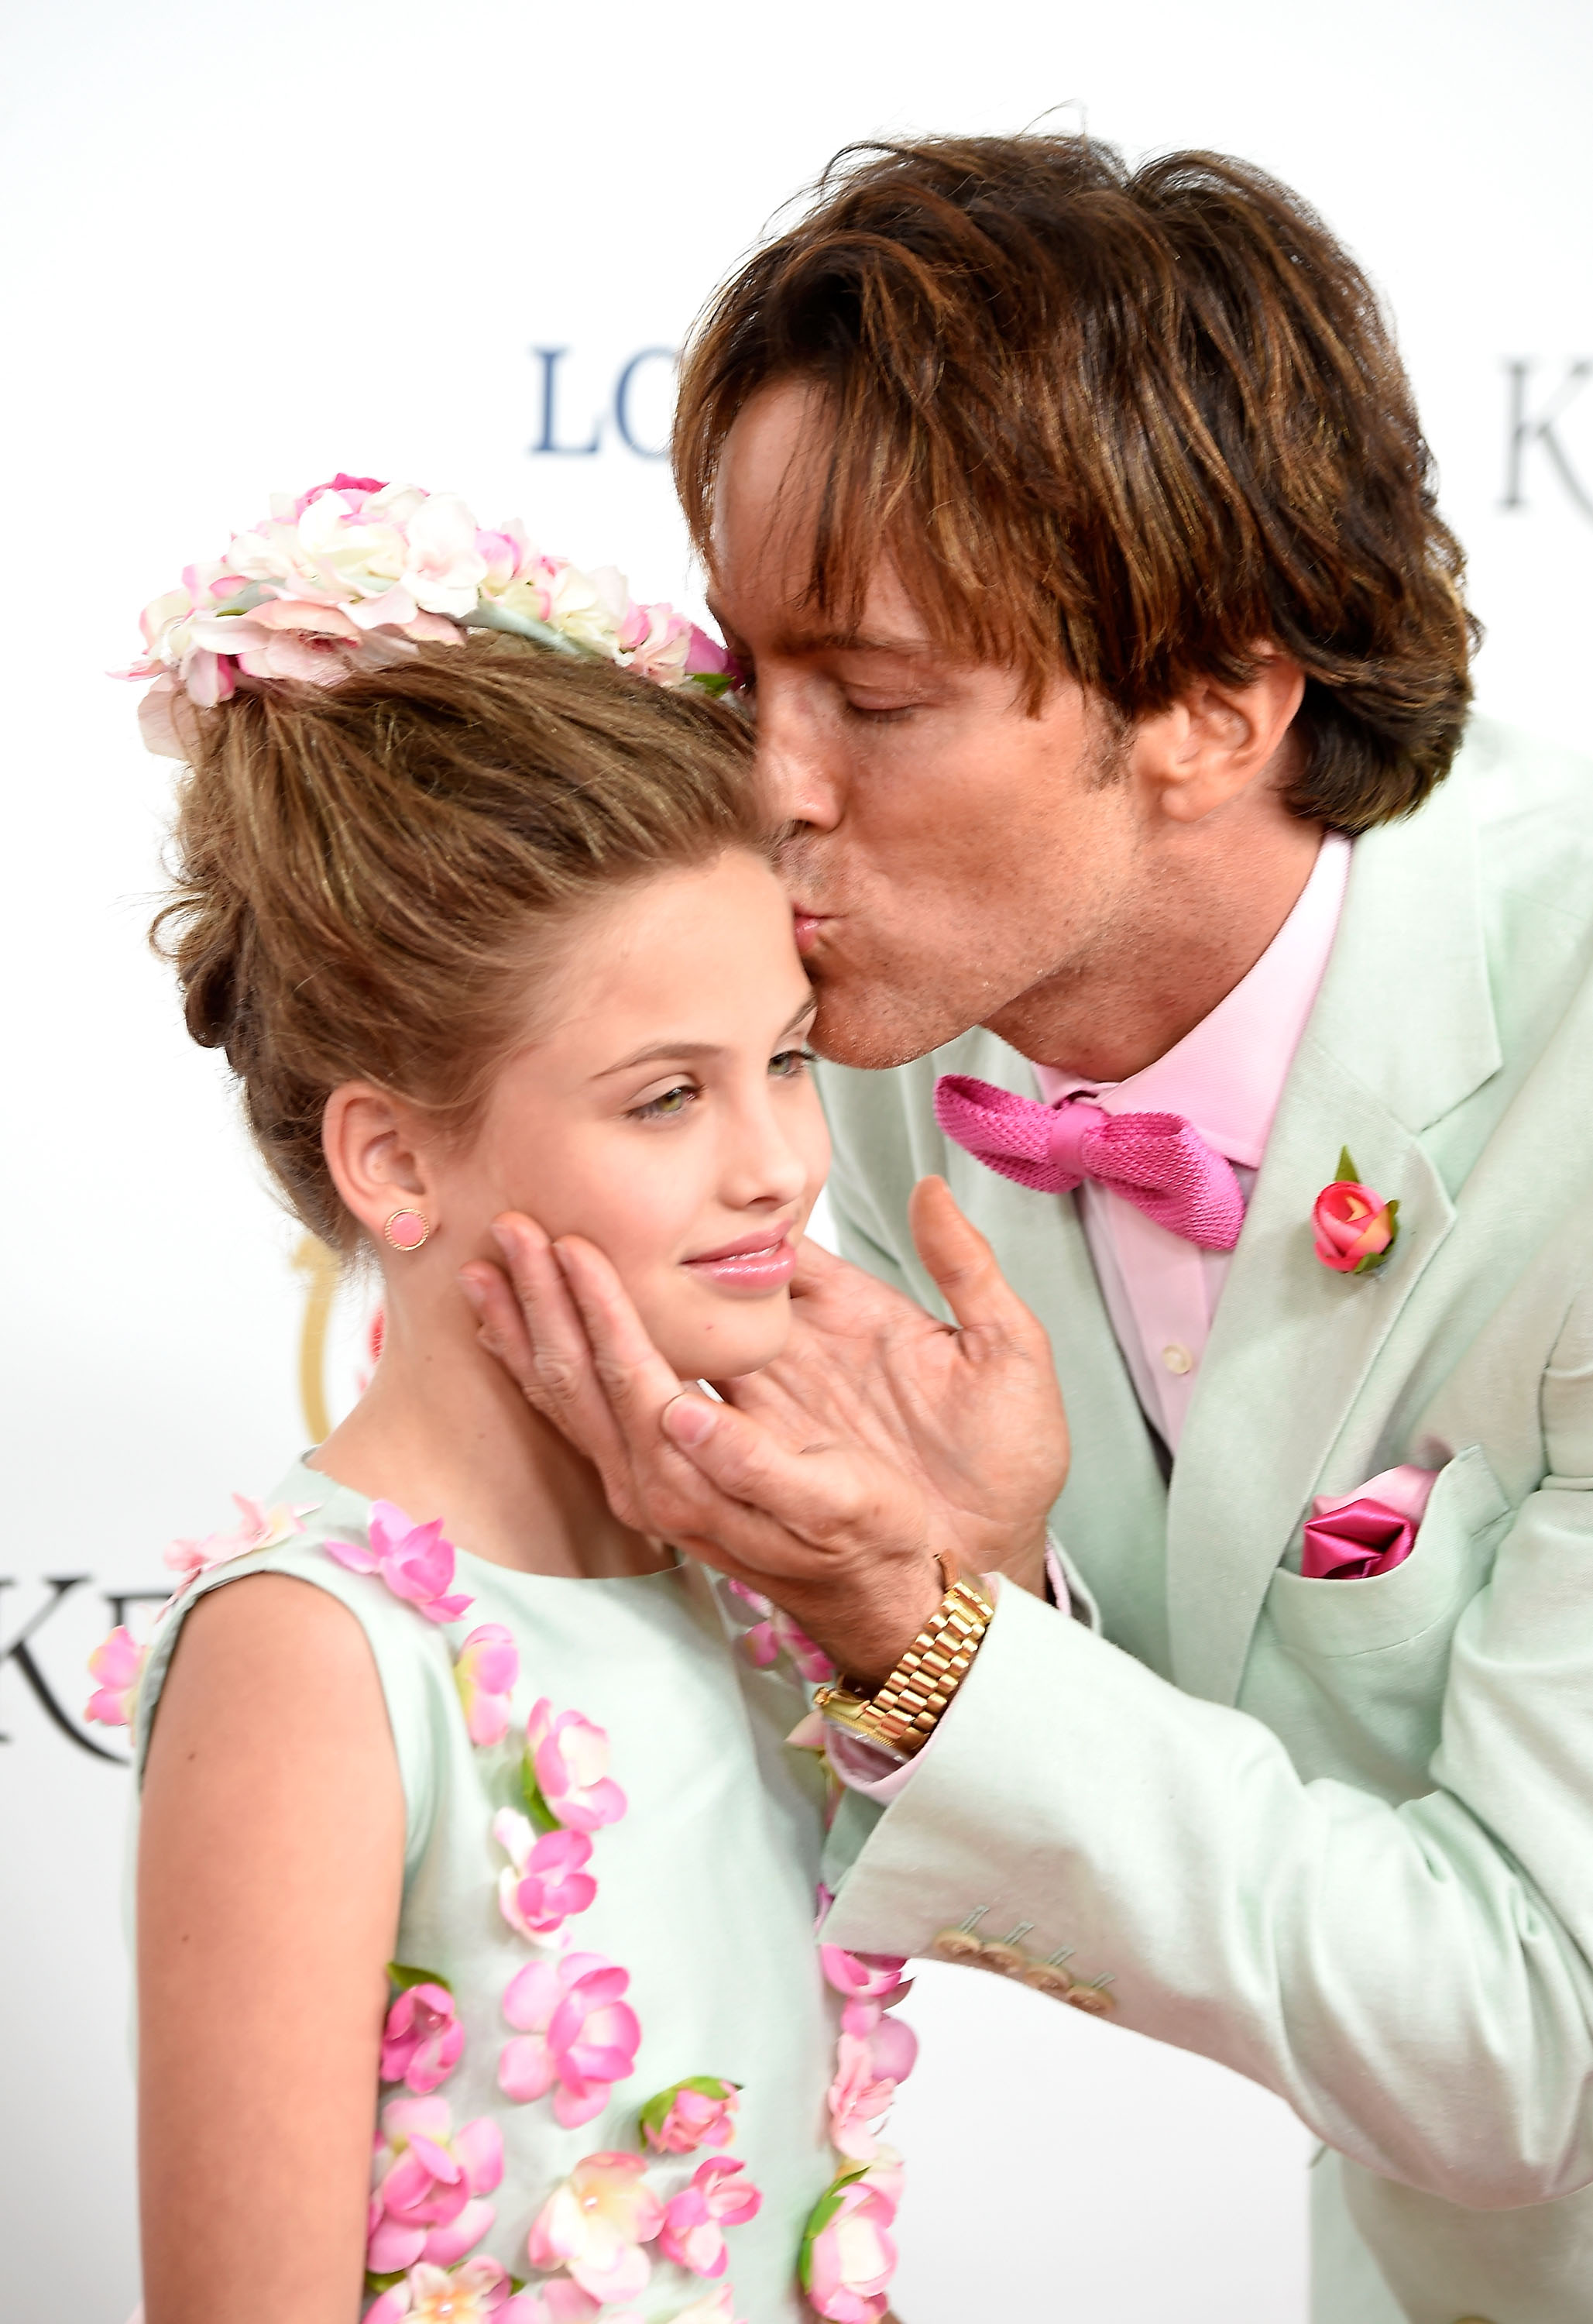 Larry Birkhead and daughter Dannielynn at the 142nd Kentucky Derby at Churchill Downs on May 07, 2016 | Source: Getty Images